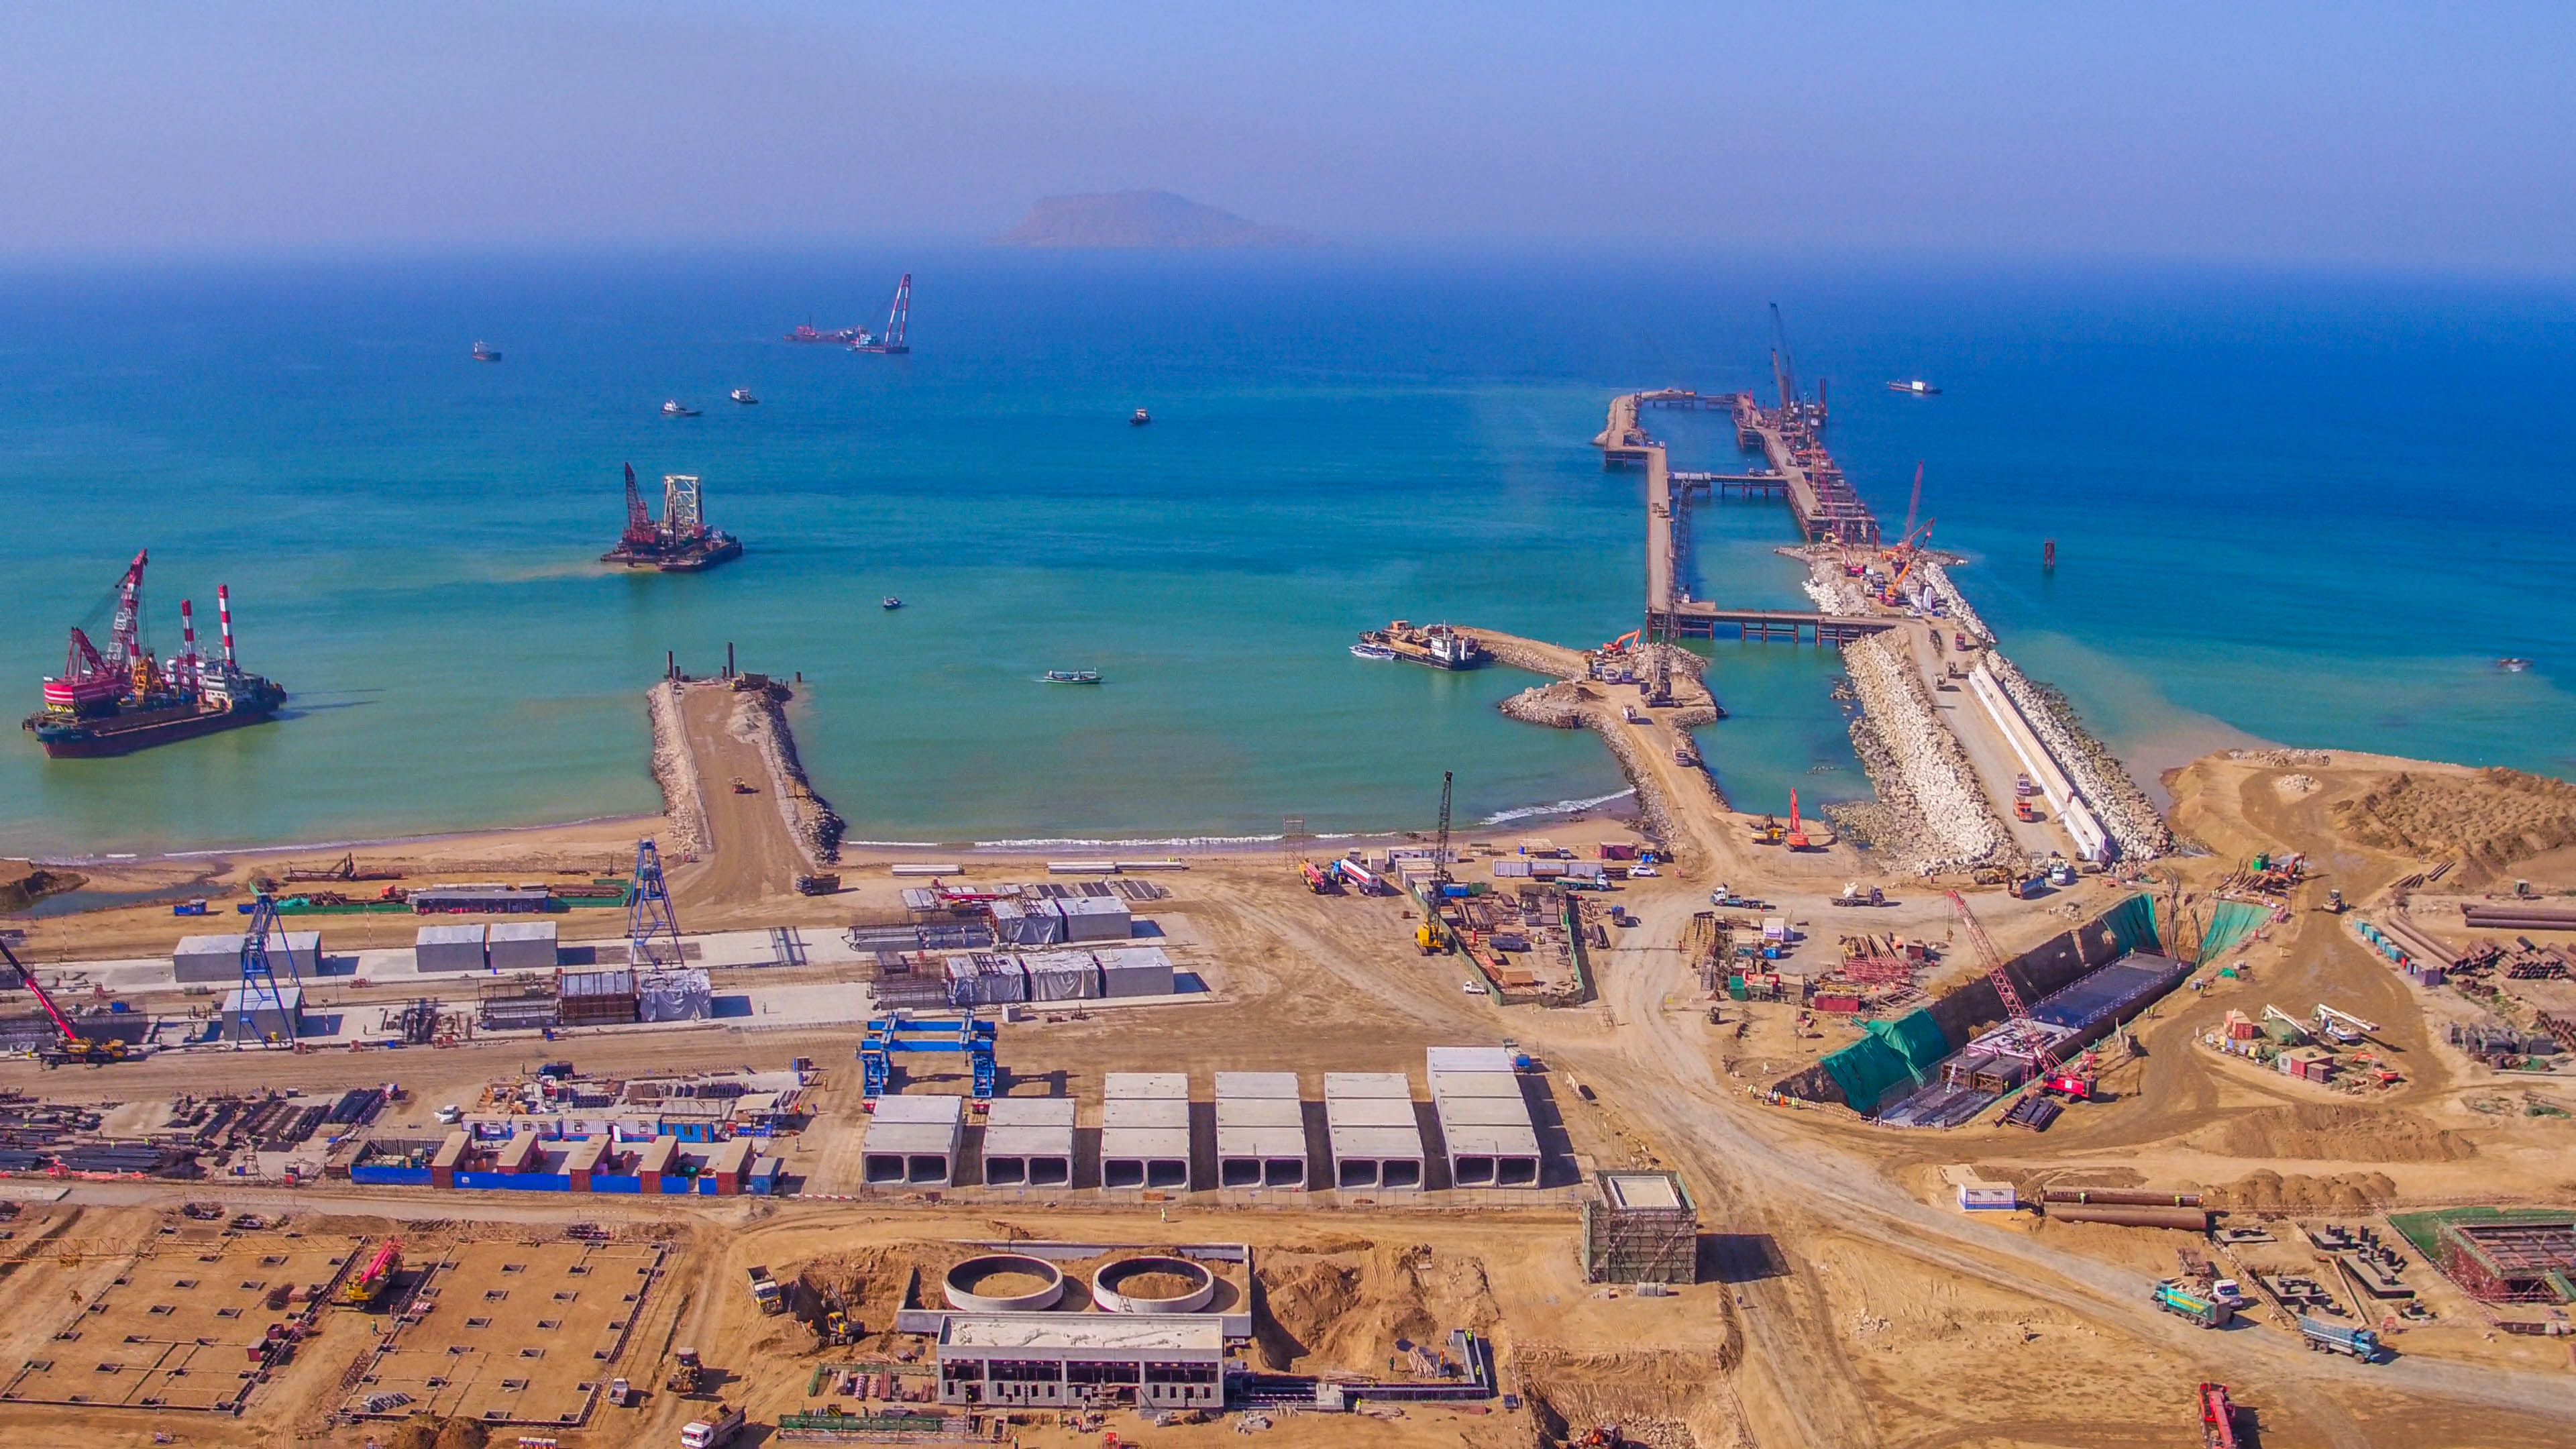 The photo shows Hub coal-fired power plant project that is under construction in Pakistan’s southwestern province of Balochistan. [Photo courtesy of State Power Investment Corporation]